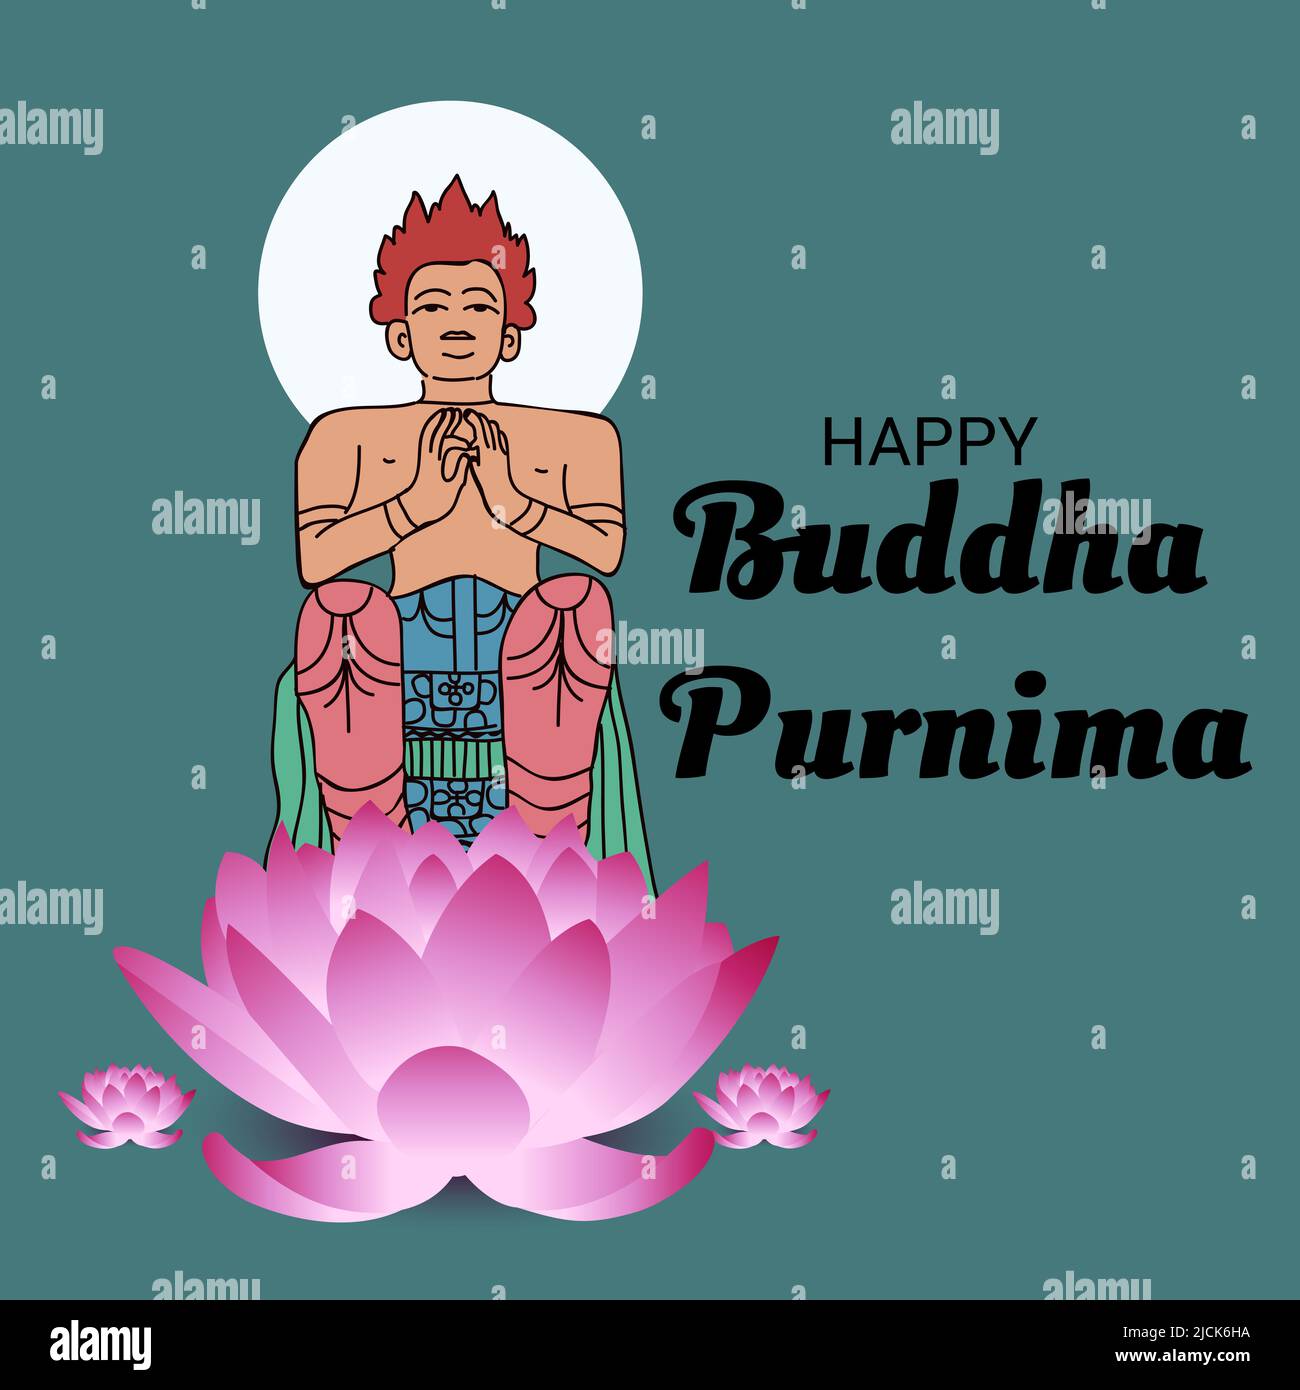 Vector illustration of  banner, poster, flyer with nice and creative design, for Buddha Purnima or Vesak Day. Stock Photo